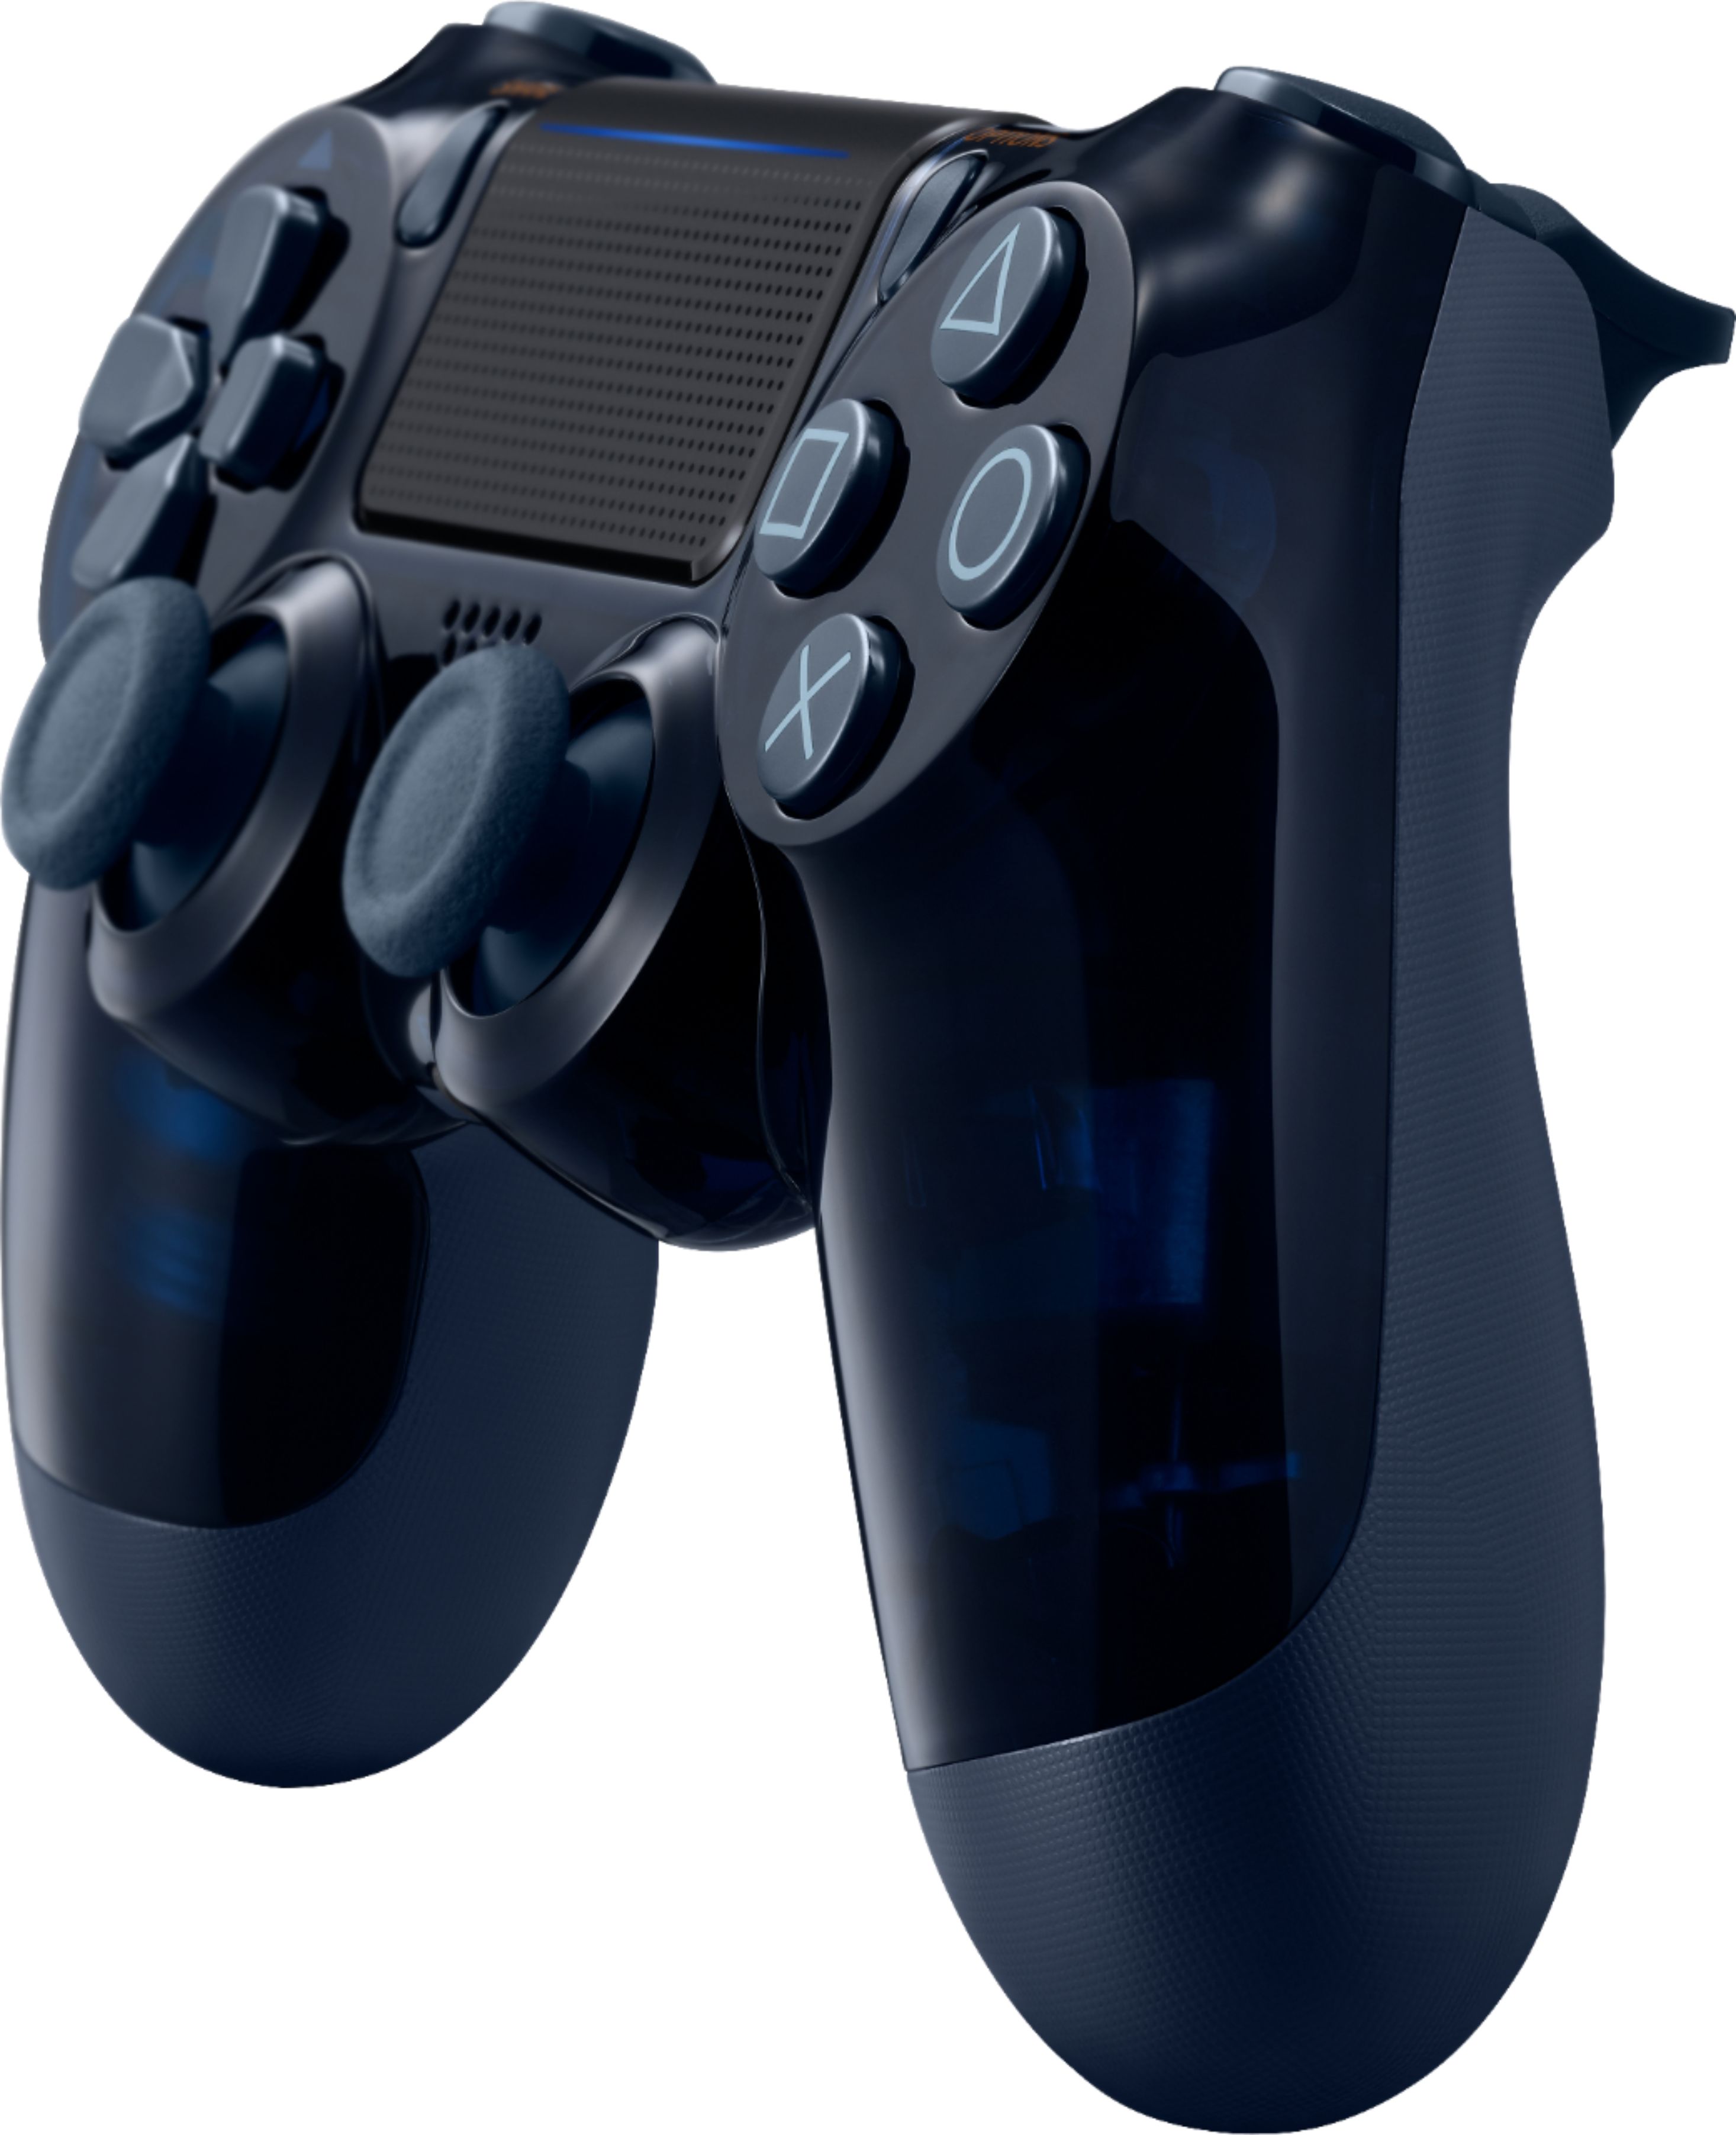 ps4 500 million edition controller